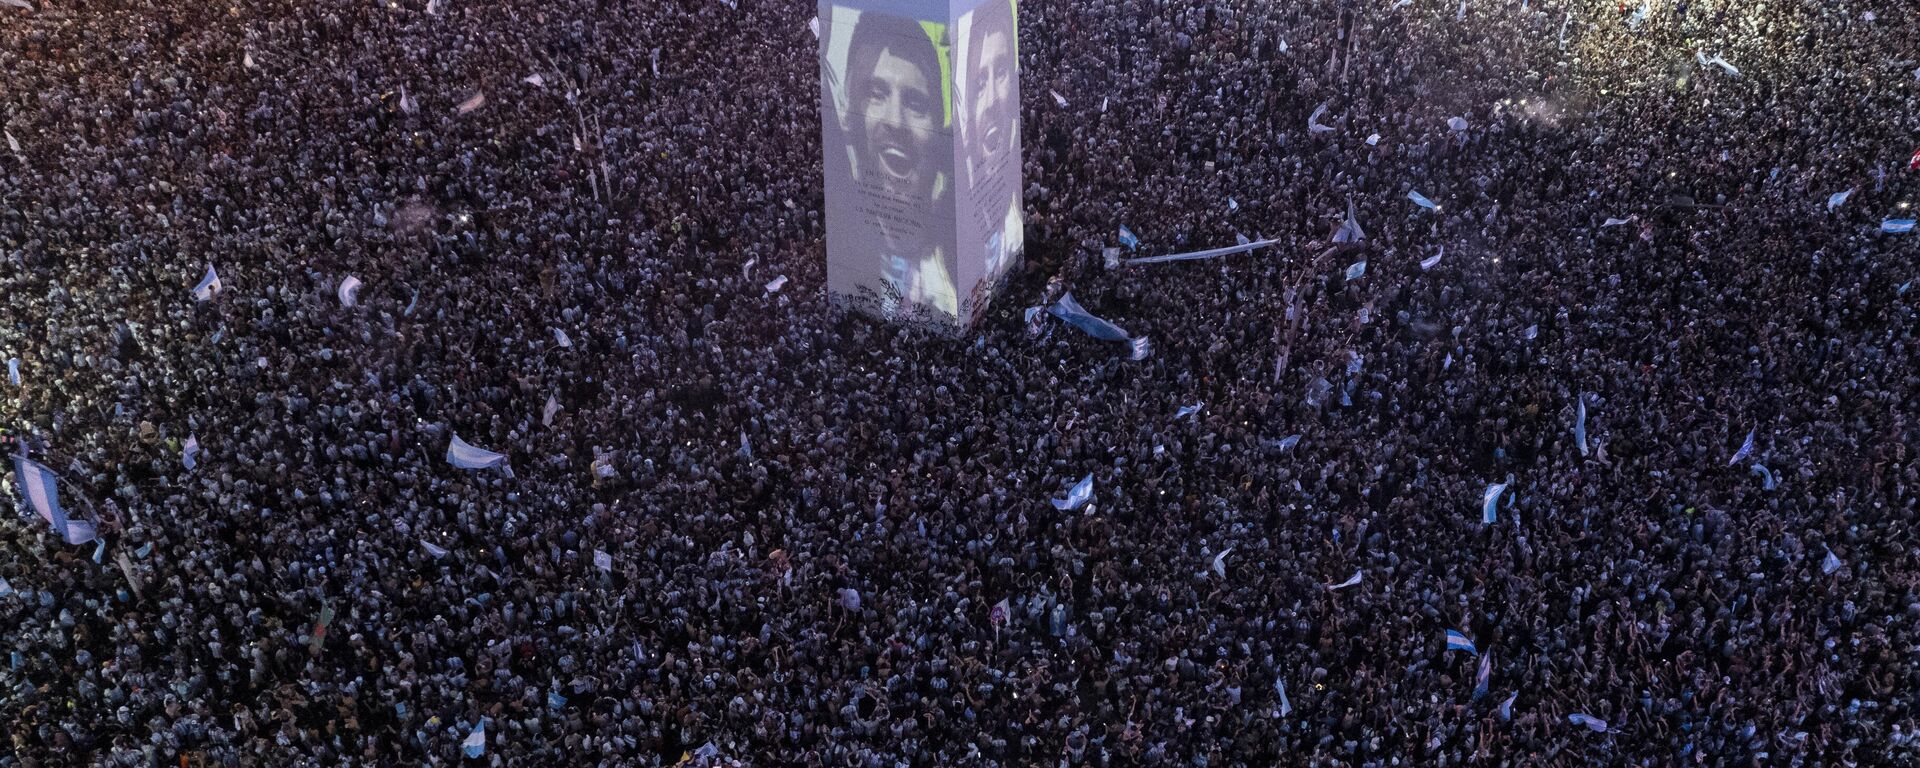 Tha face of Argentina's striker Lionel Messi is projected on the capital's Obelisk as fans celebrate their team's World Cup victory over France in Buenos Aires, Argentina, Sunday, Dec. 18, 2022. - Sputnik India, 1920, 19.12.2022